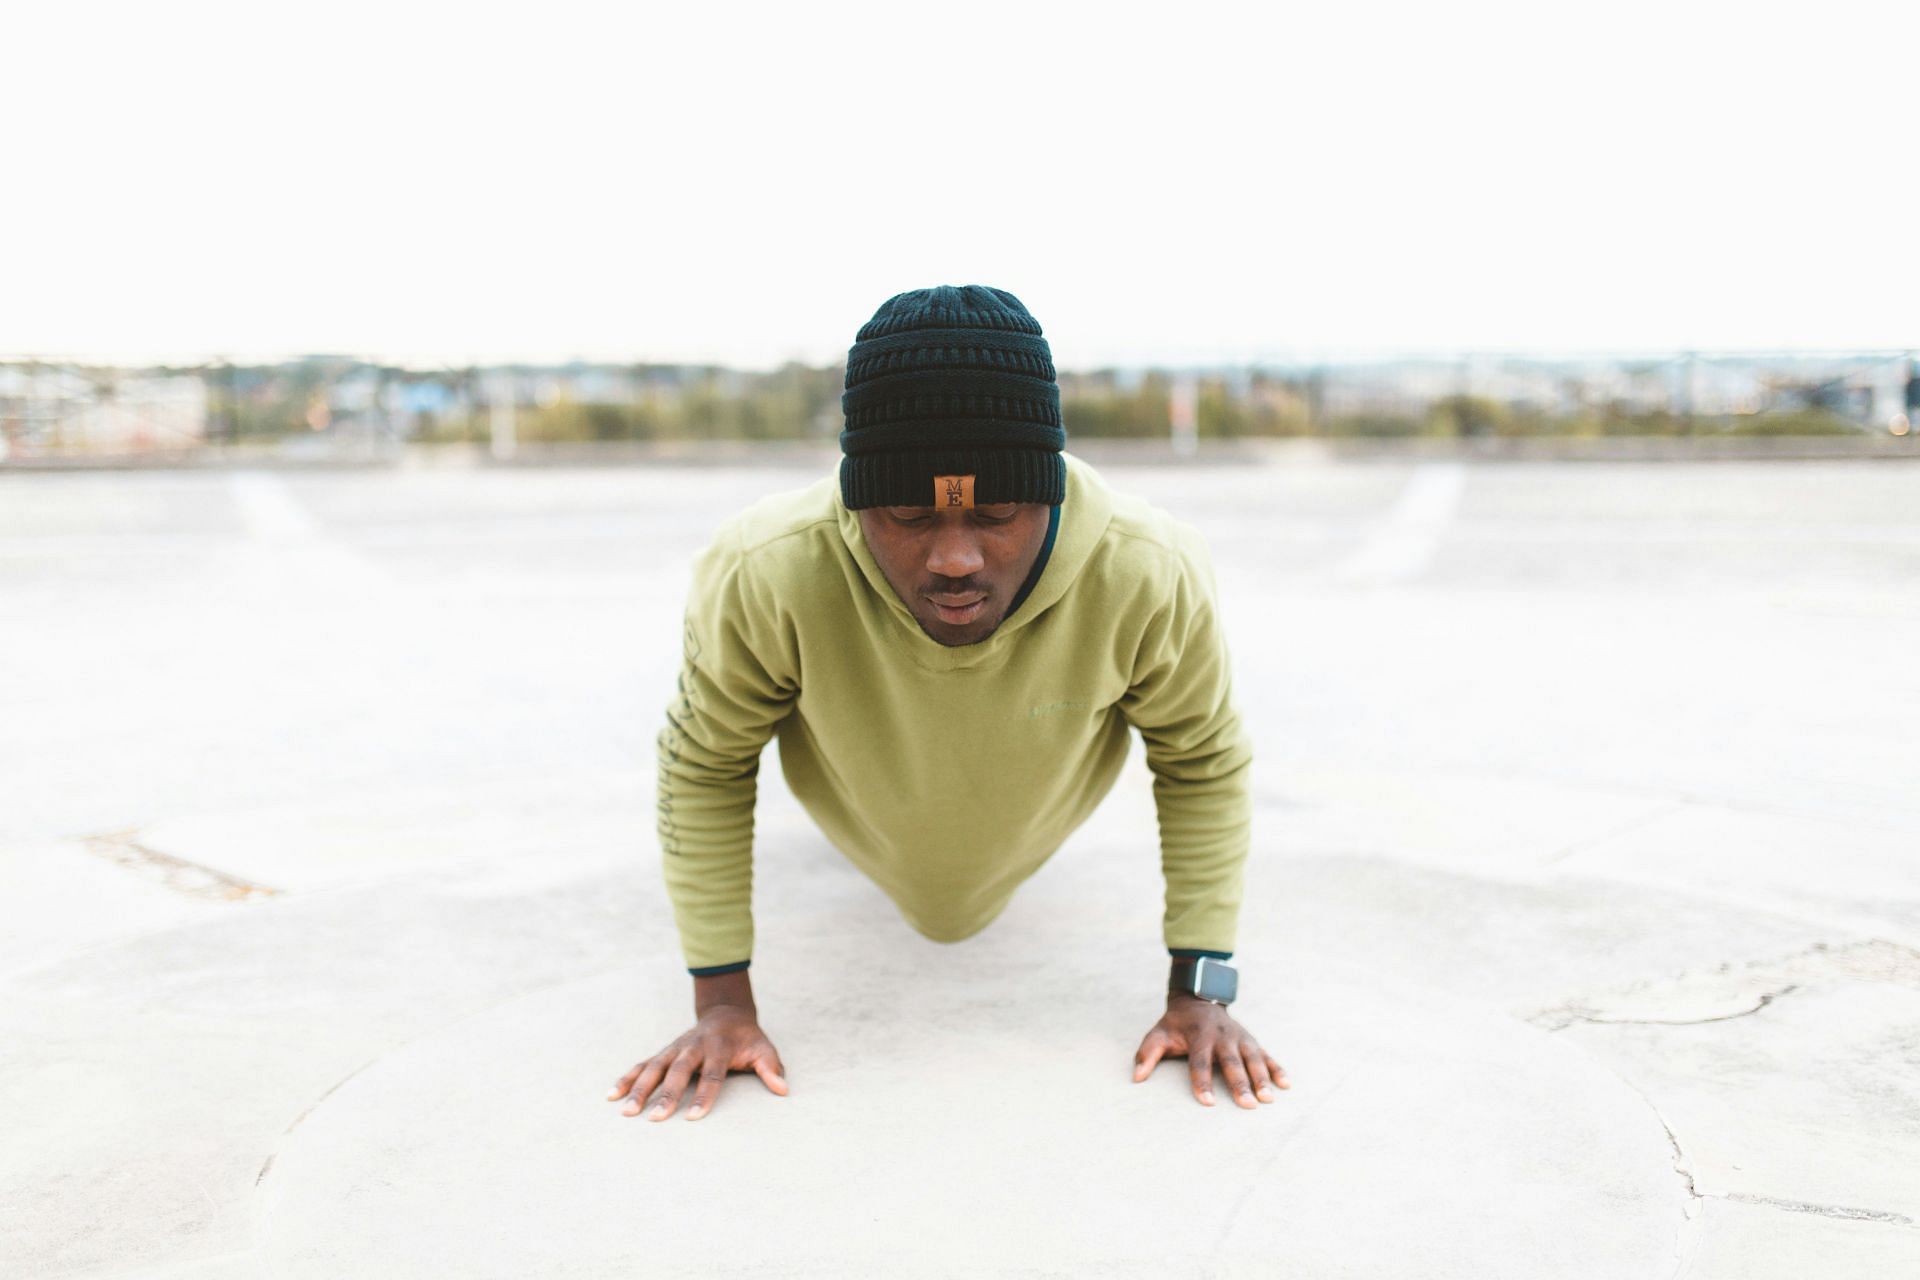 Close grip pushups are a harder version of pushup (Image by Sam Owoyemi/Unsplash)